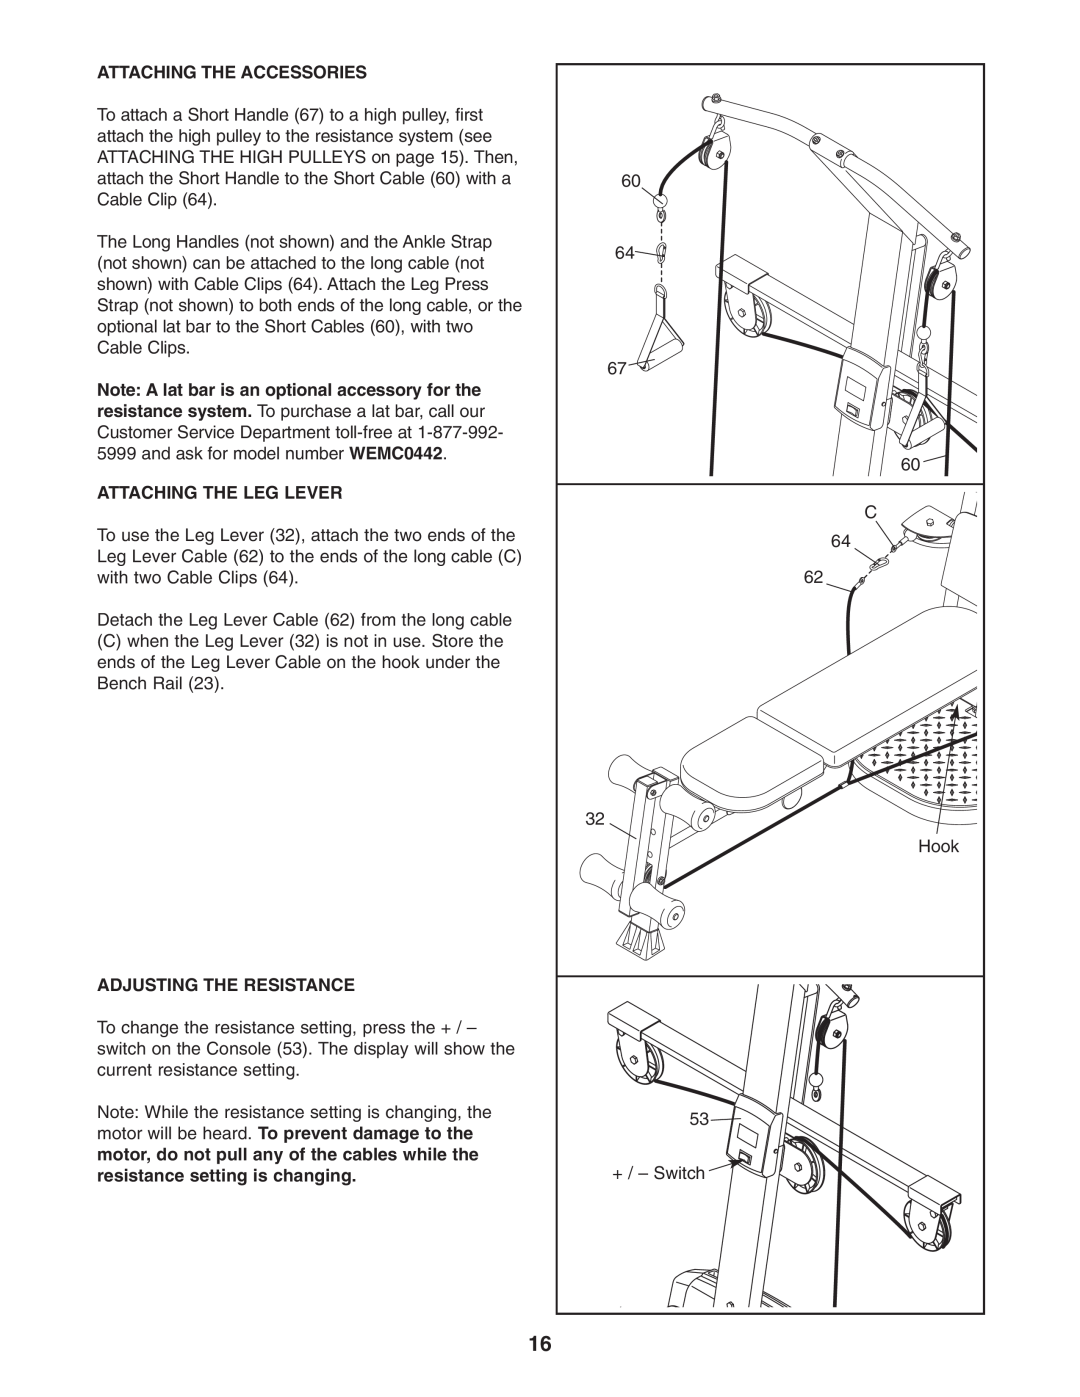 Weider WESY68632 user manual Attaching The Accessories, Attaching The Leg Lever, Adjusting The Resistance 